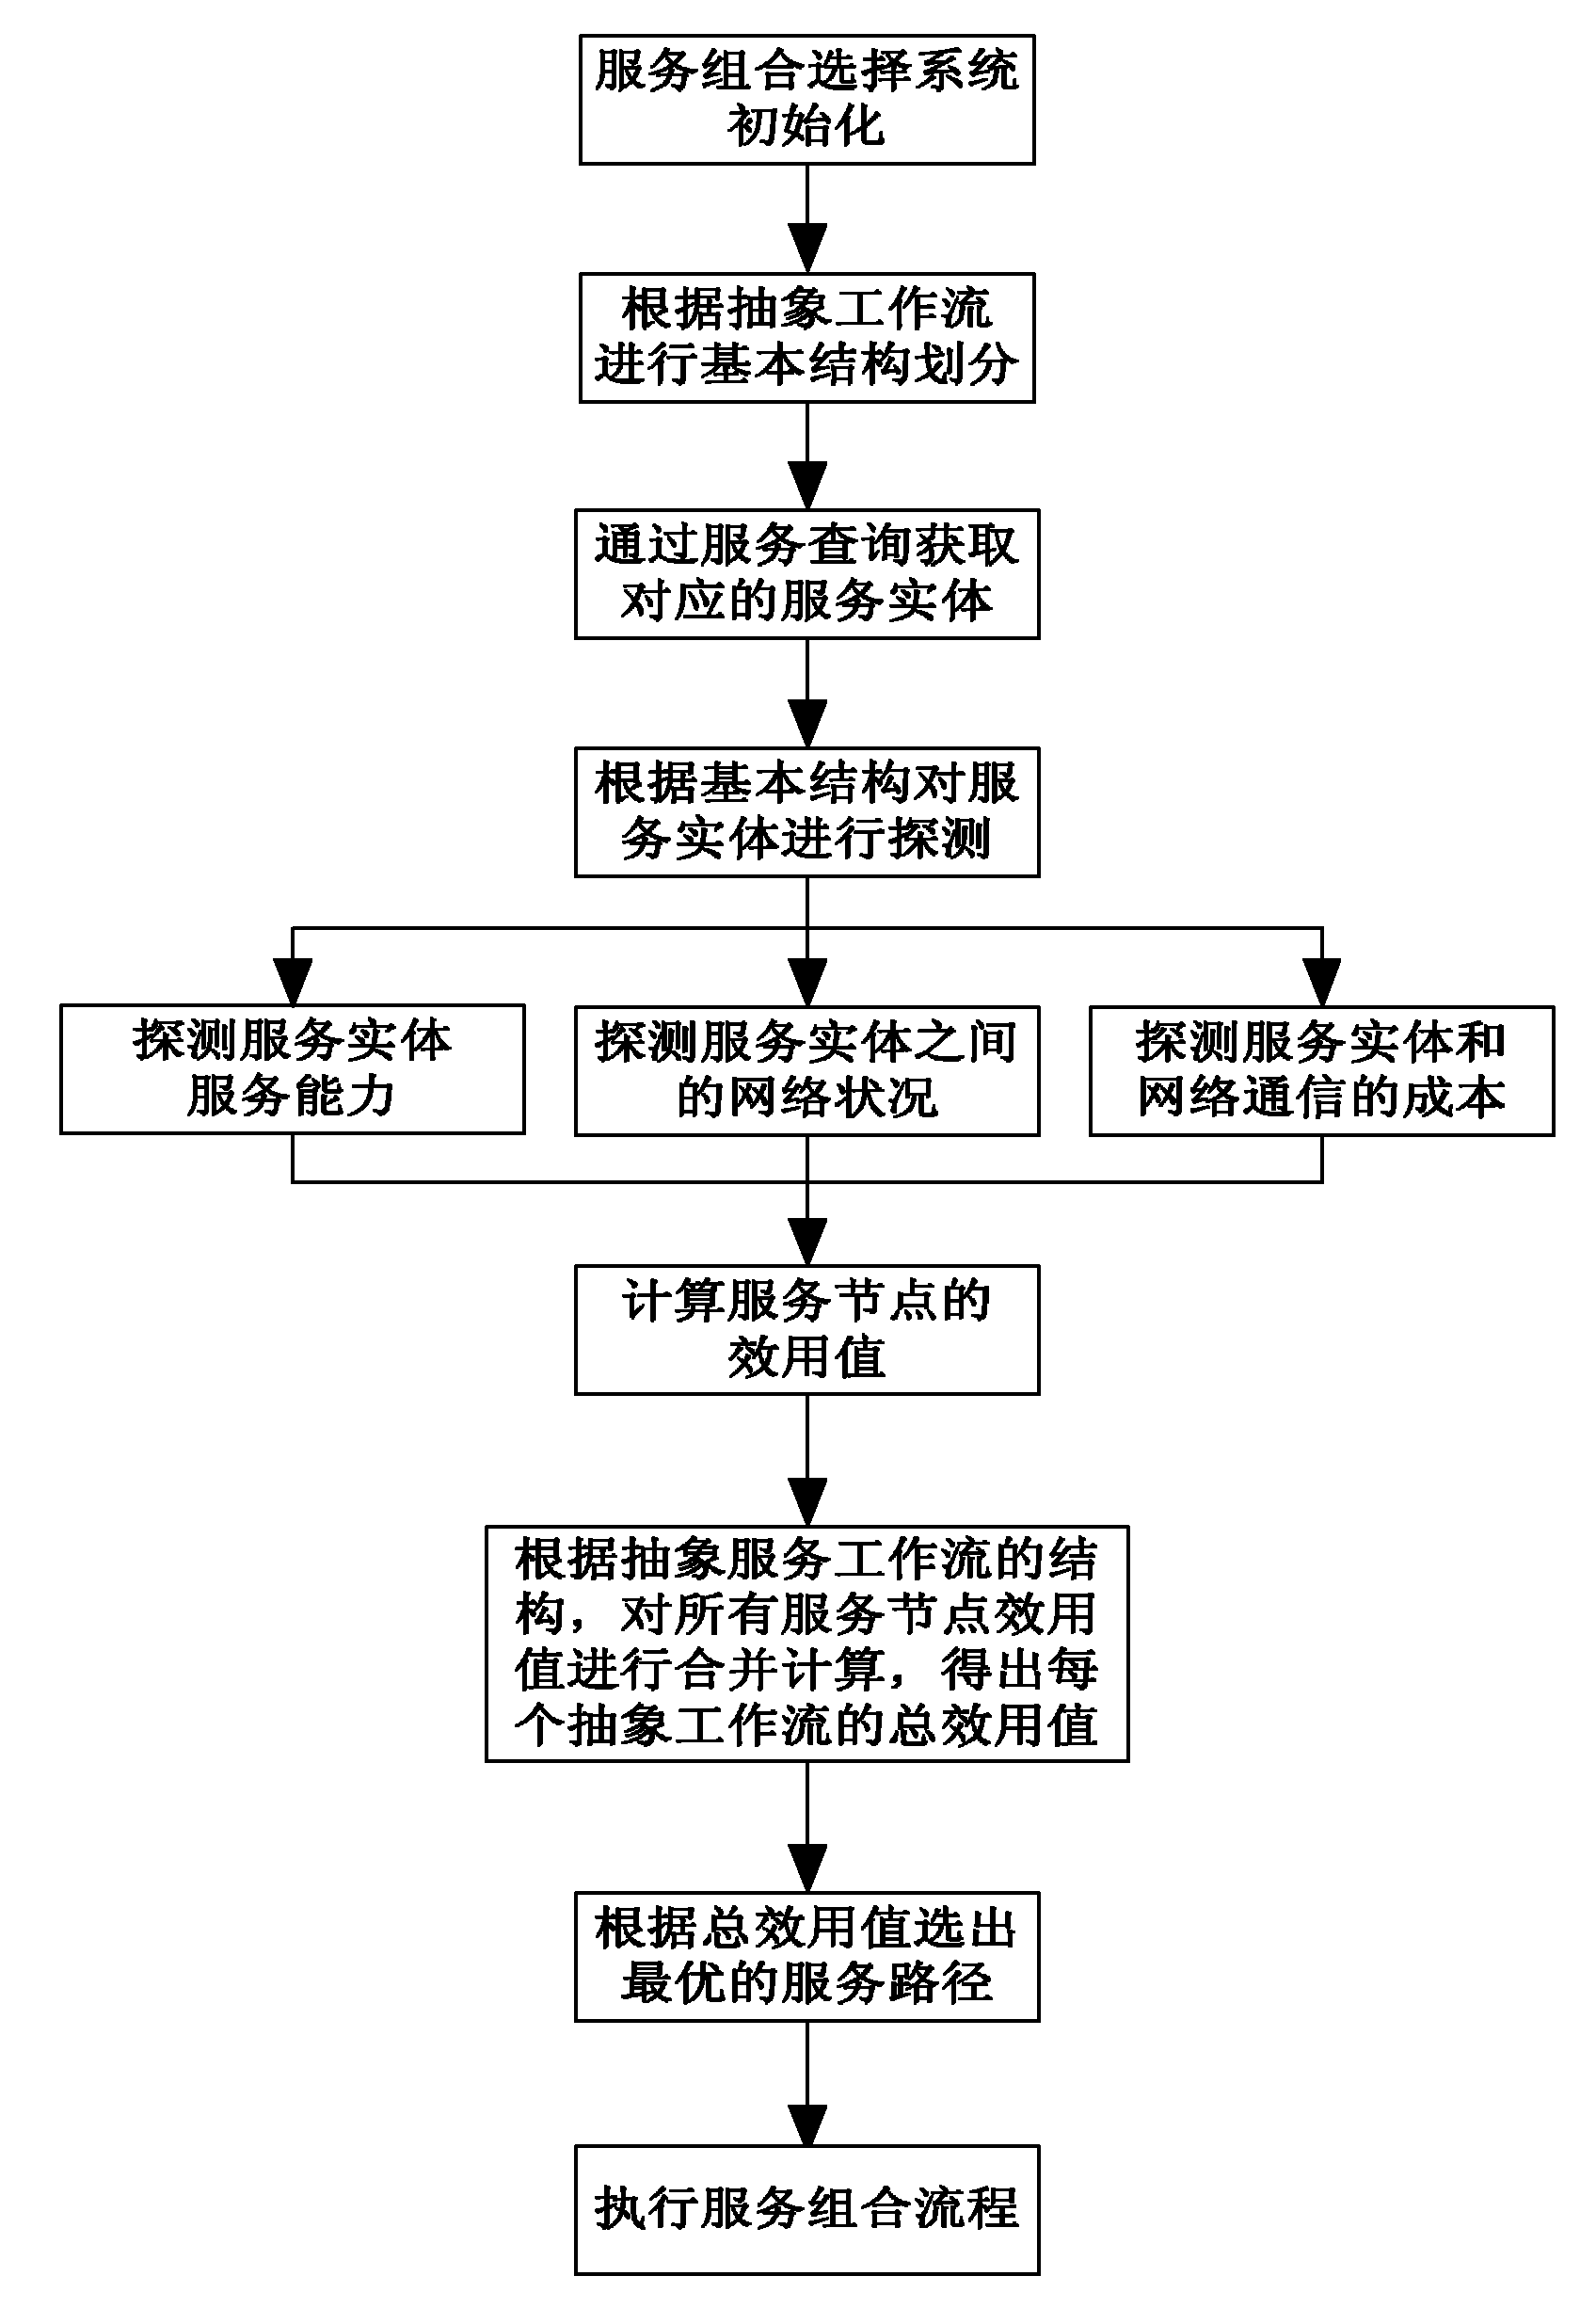 Resource-oriented service composition selection method